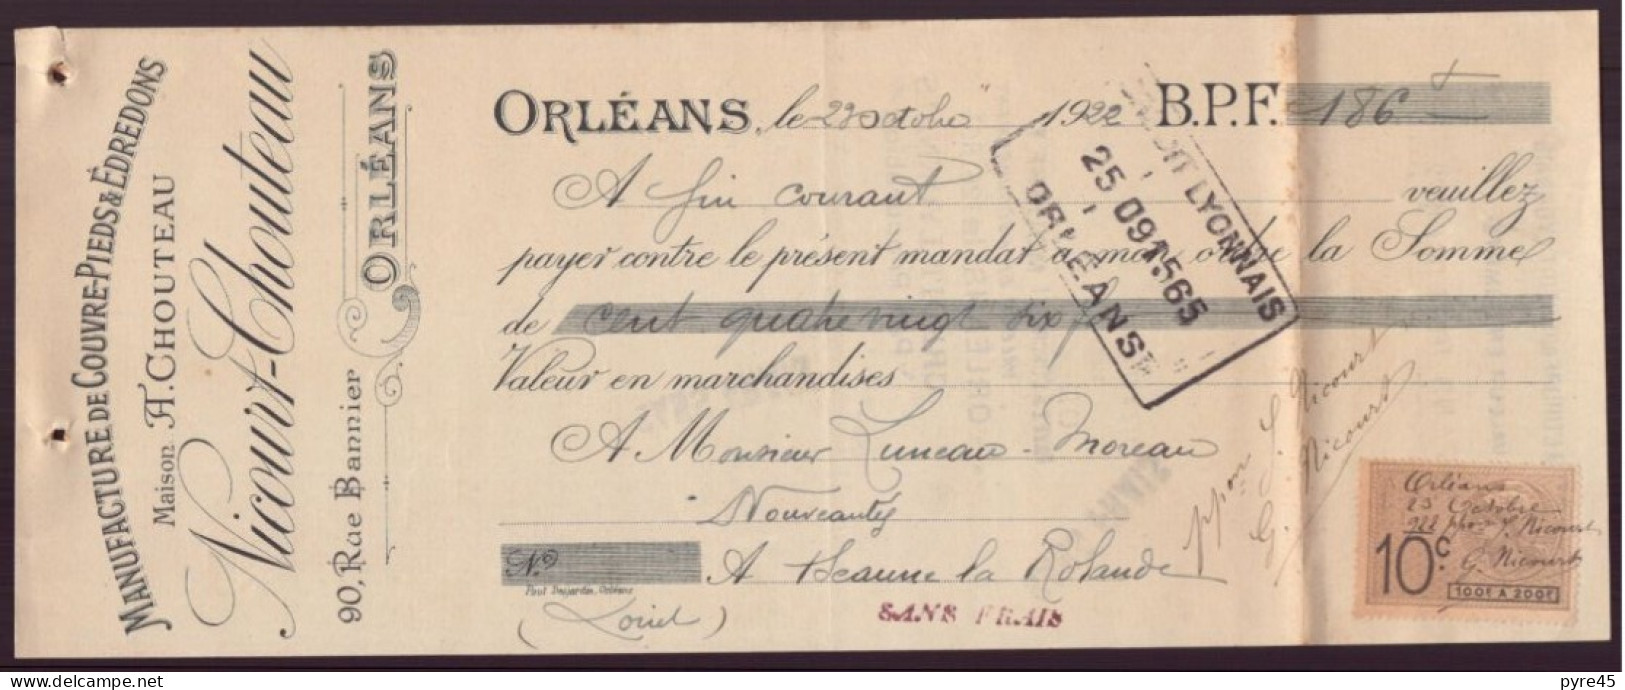 CHEQUE DU 29 / 10 / 1922 MANUFACTURE DE COUVRE PIEDS & EDREDONS A ORLEANS - Cheques & Traverler's Cheques